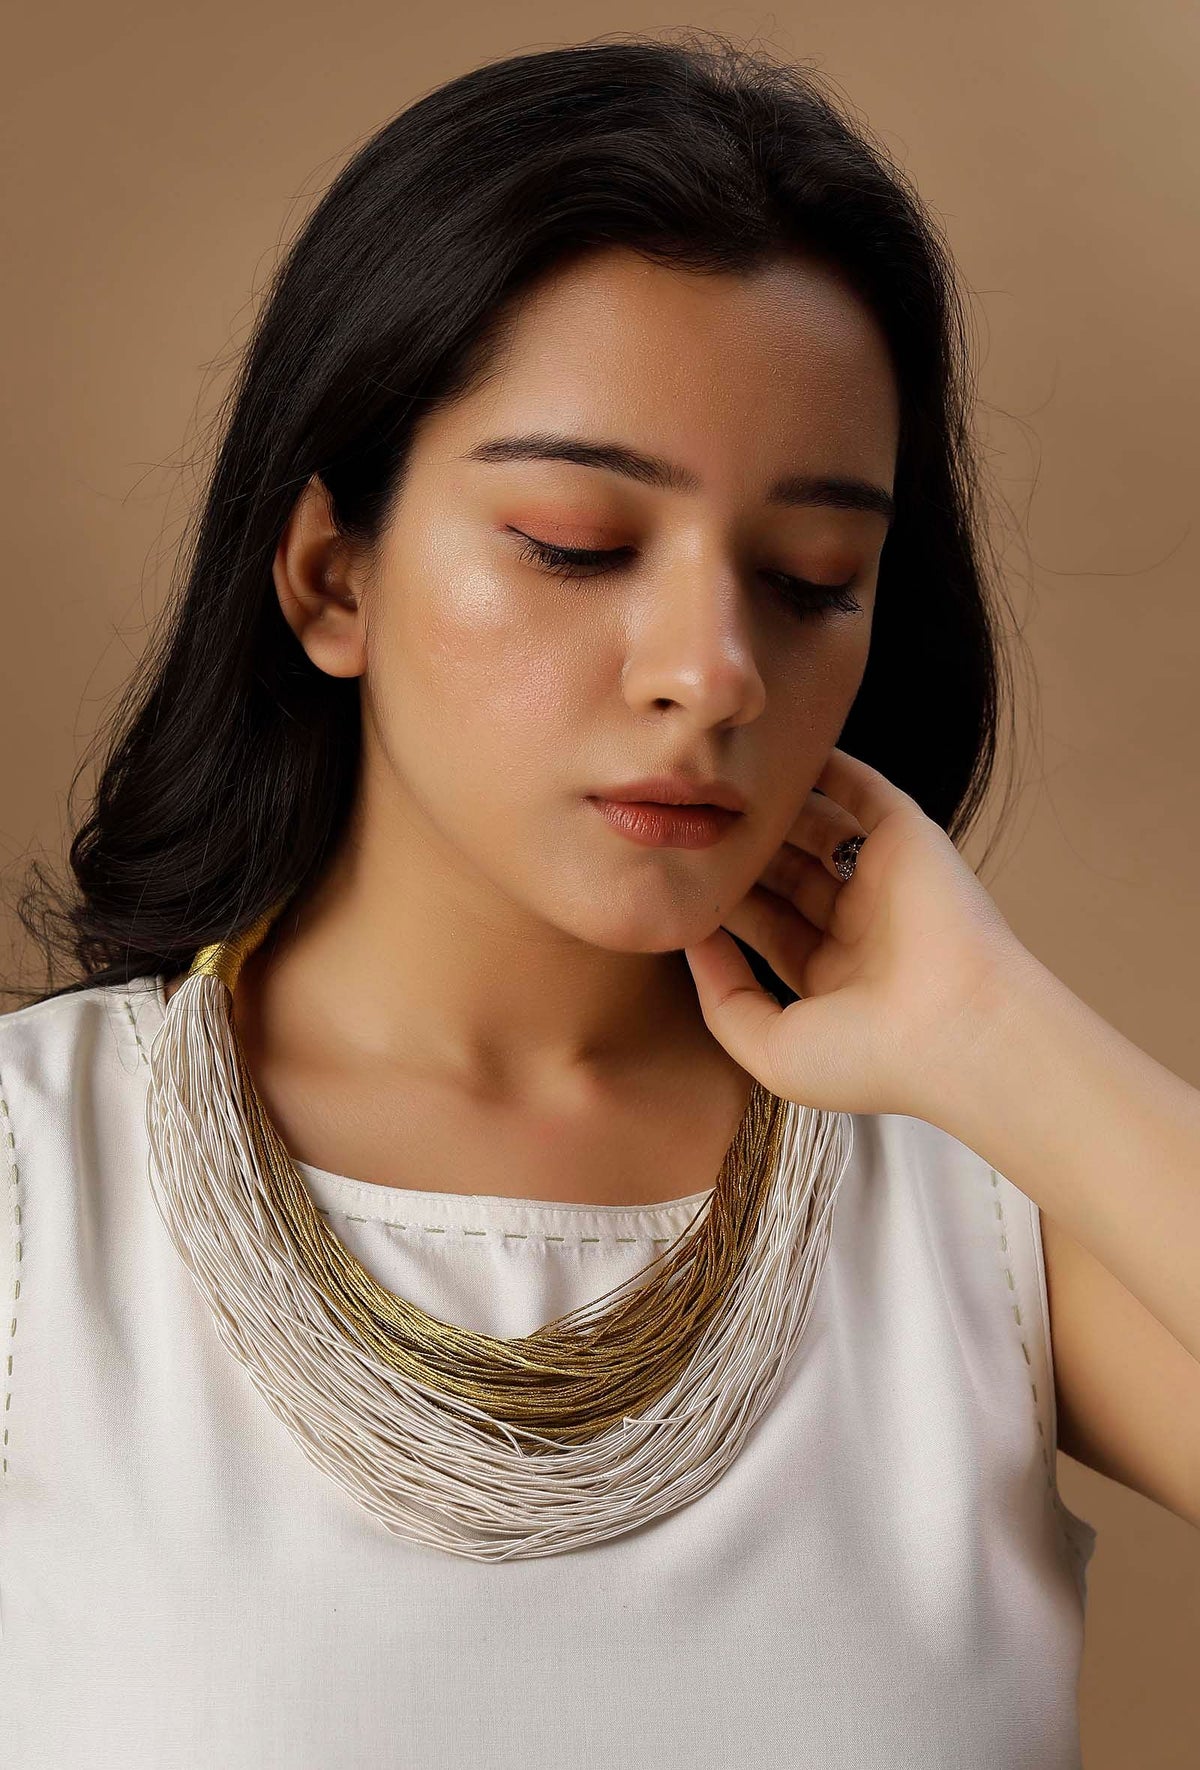 Gold and White Layered Thread Necklace